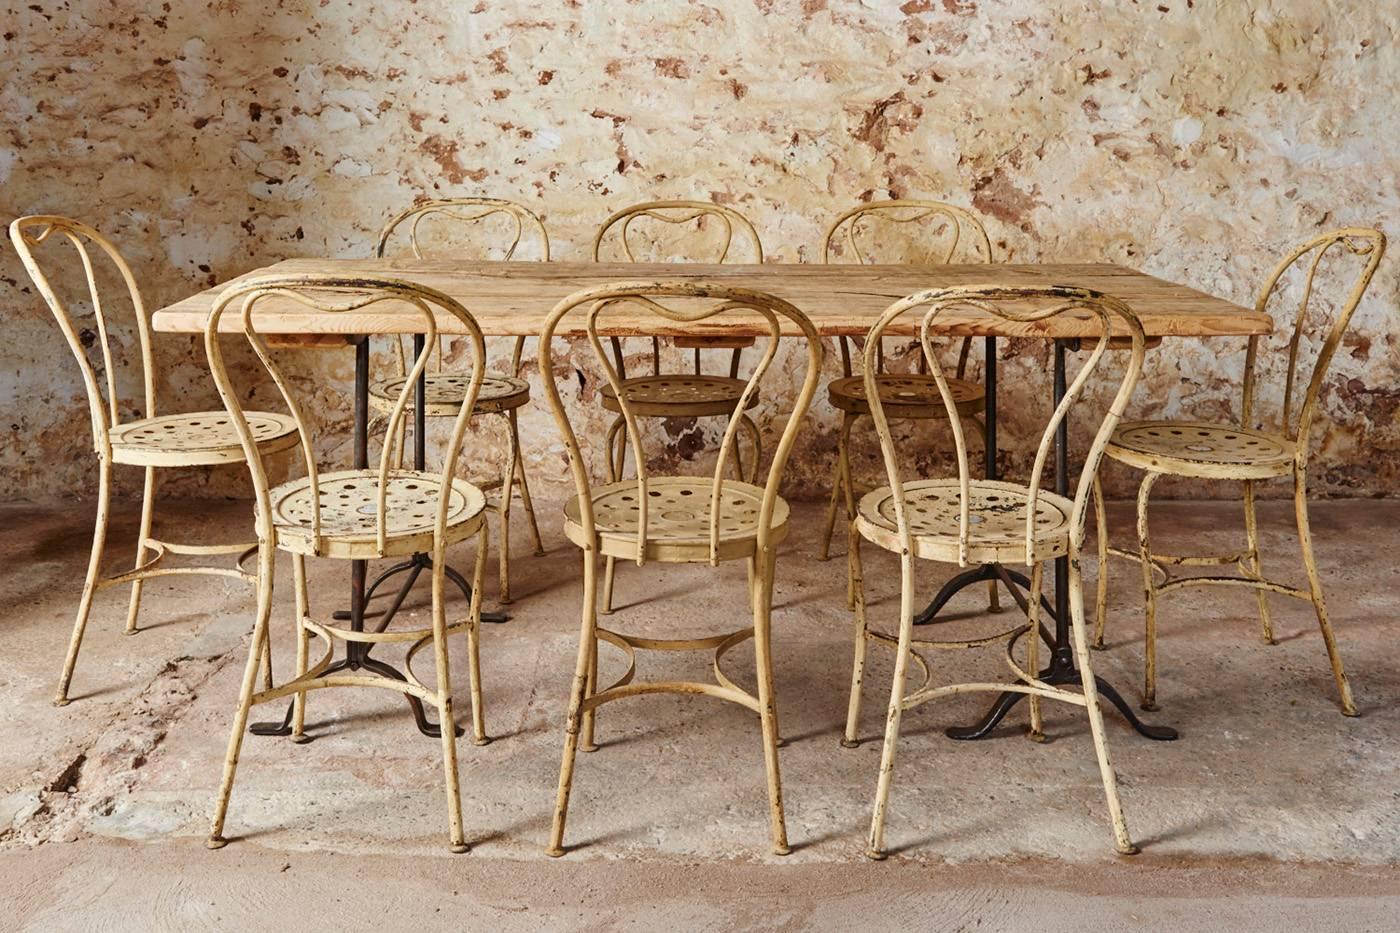 A beautiful set of eight 19th century Italian bistro chairs.

To have four in this condition would be unusual, but to have eight of this age is pretty much unheard of!

We were absolutely delighted when we found this set of elegant